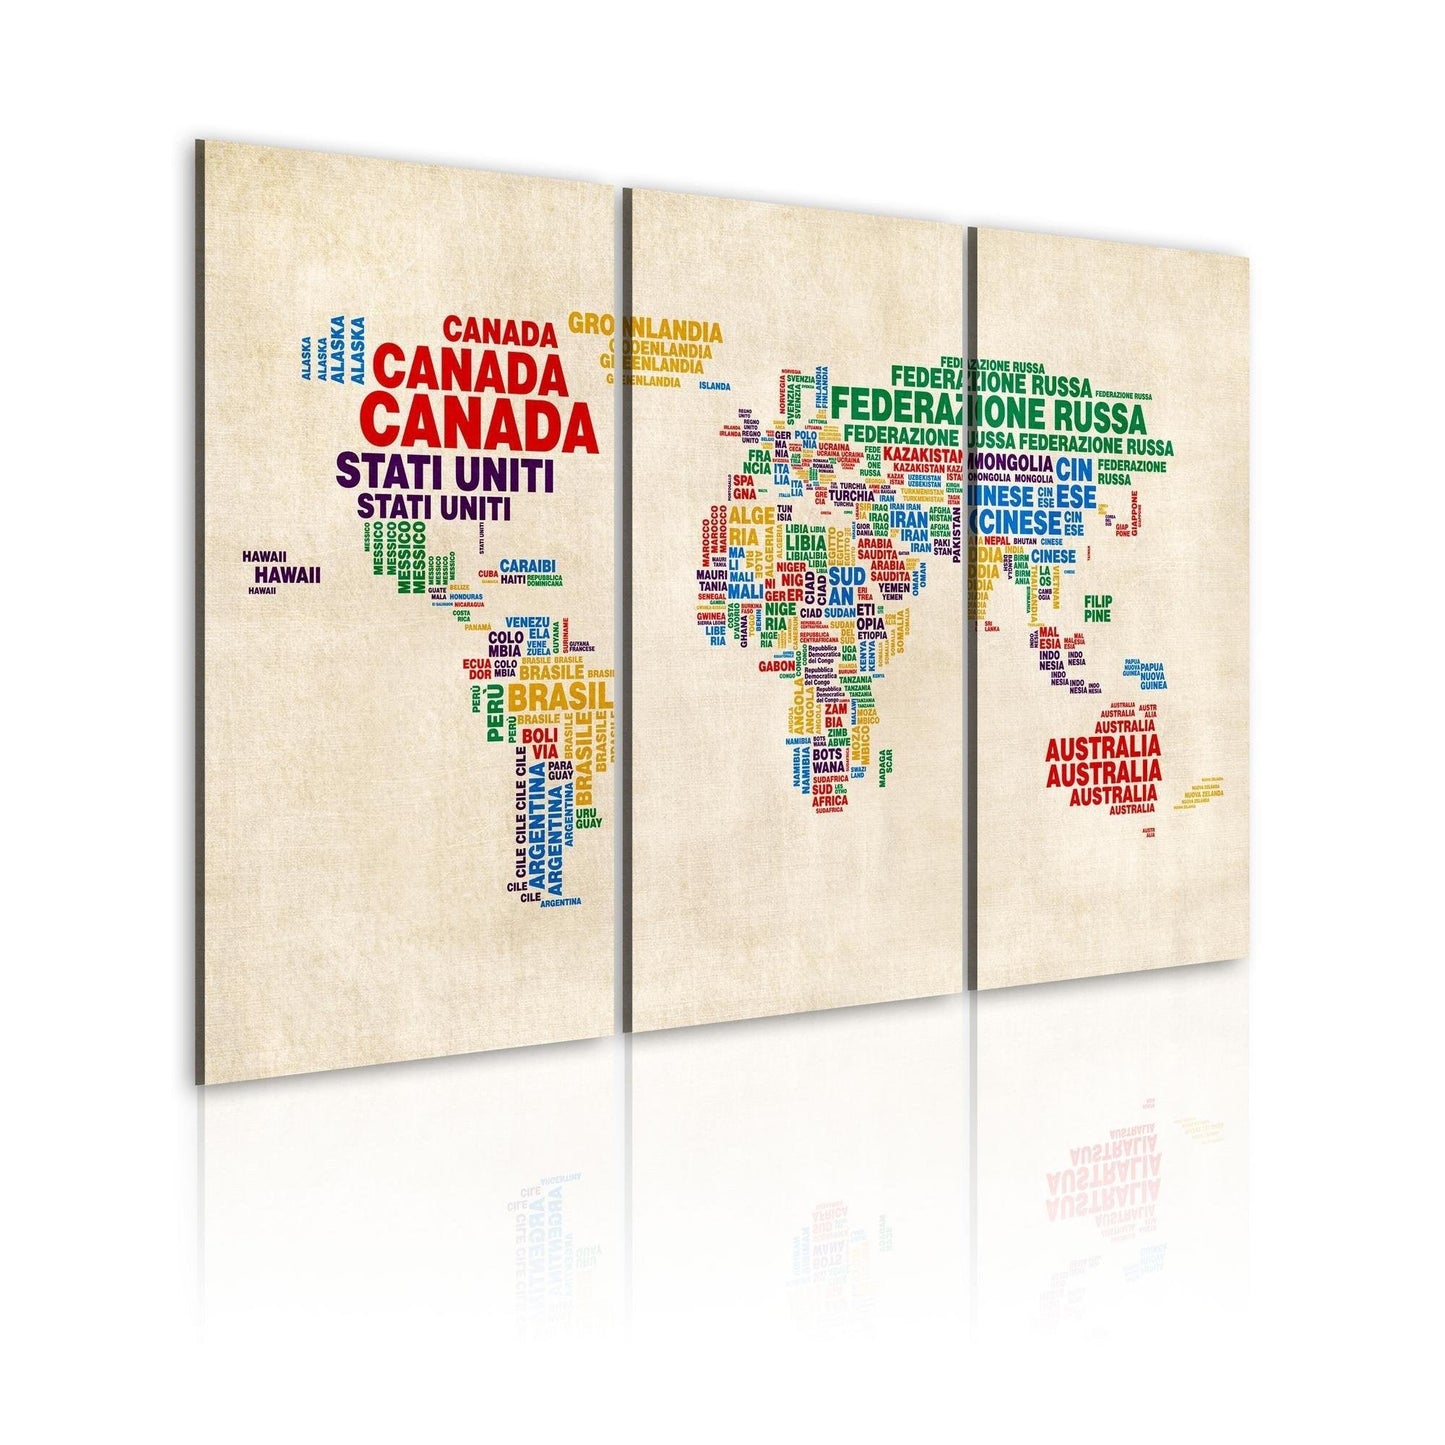 Canvas Print - Italian names of countries in vivid colors - triptych - www.trendingbestsellers.com